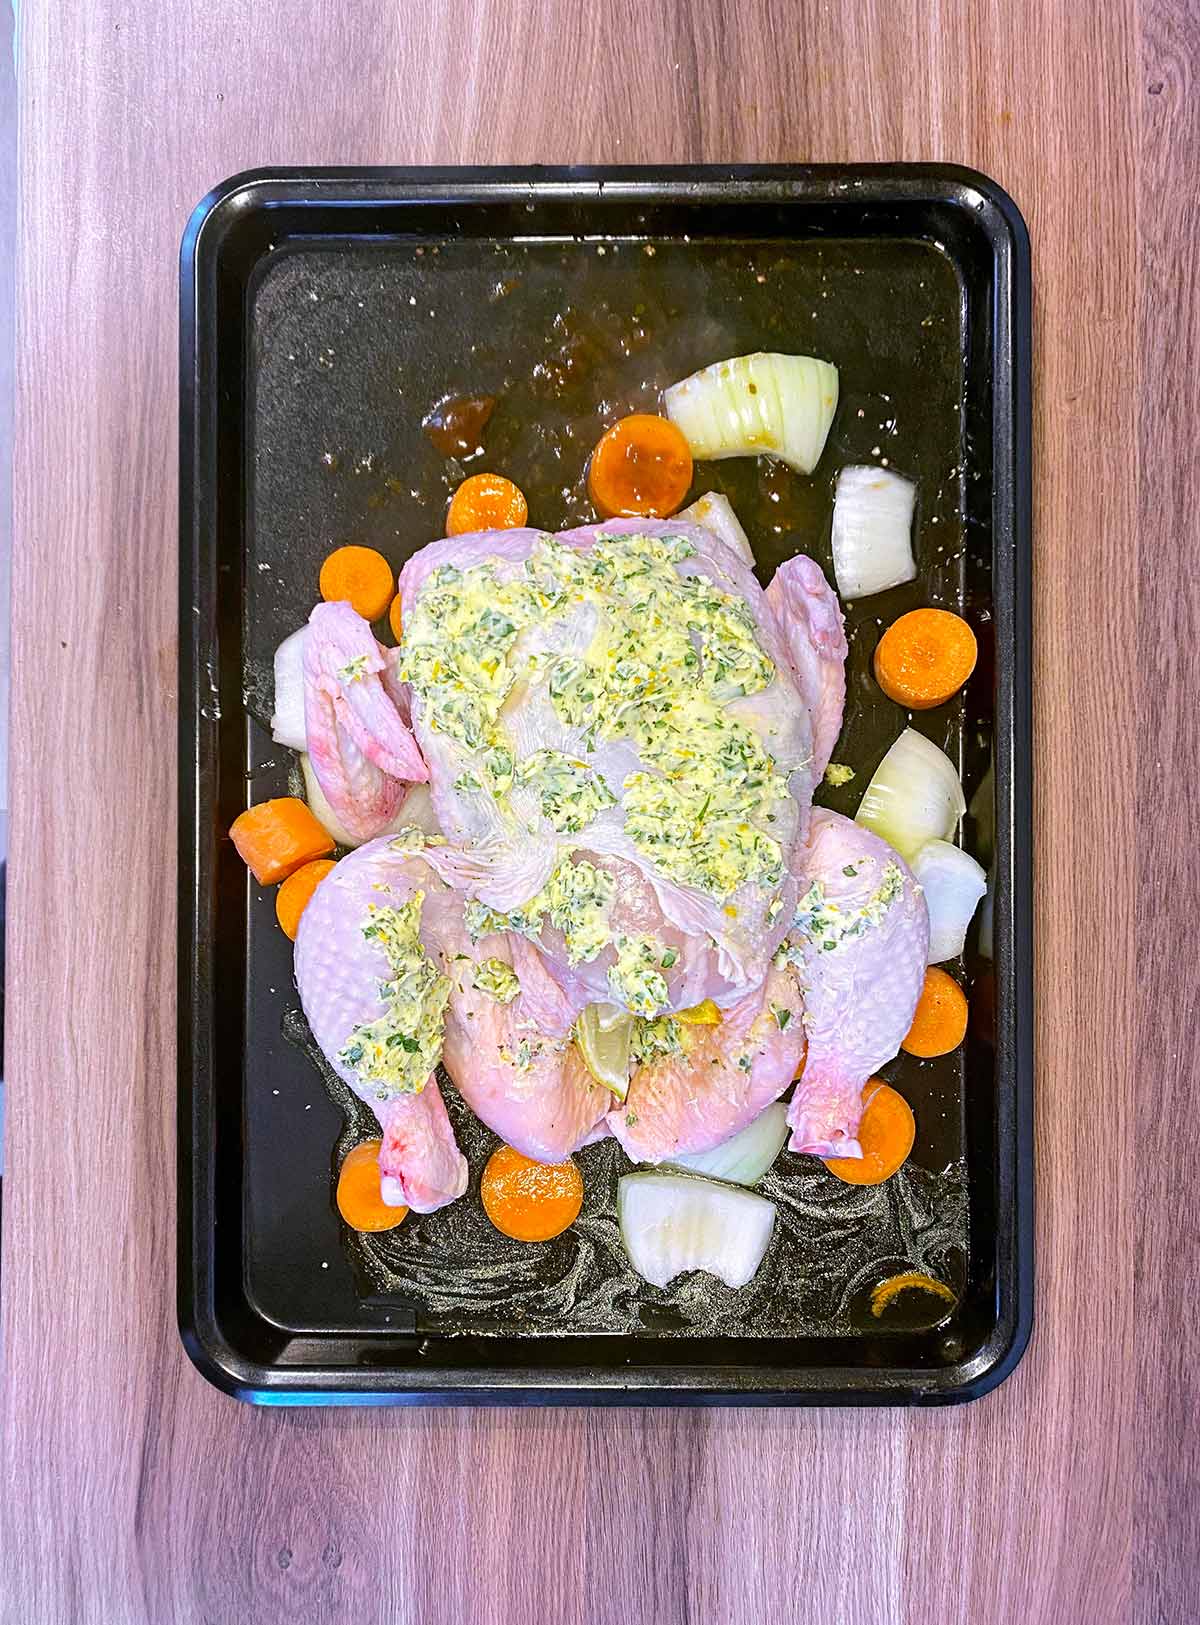 A whole chicken smothered in herb butter.